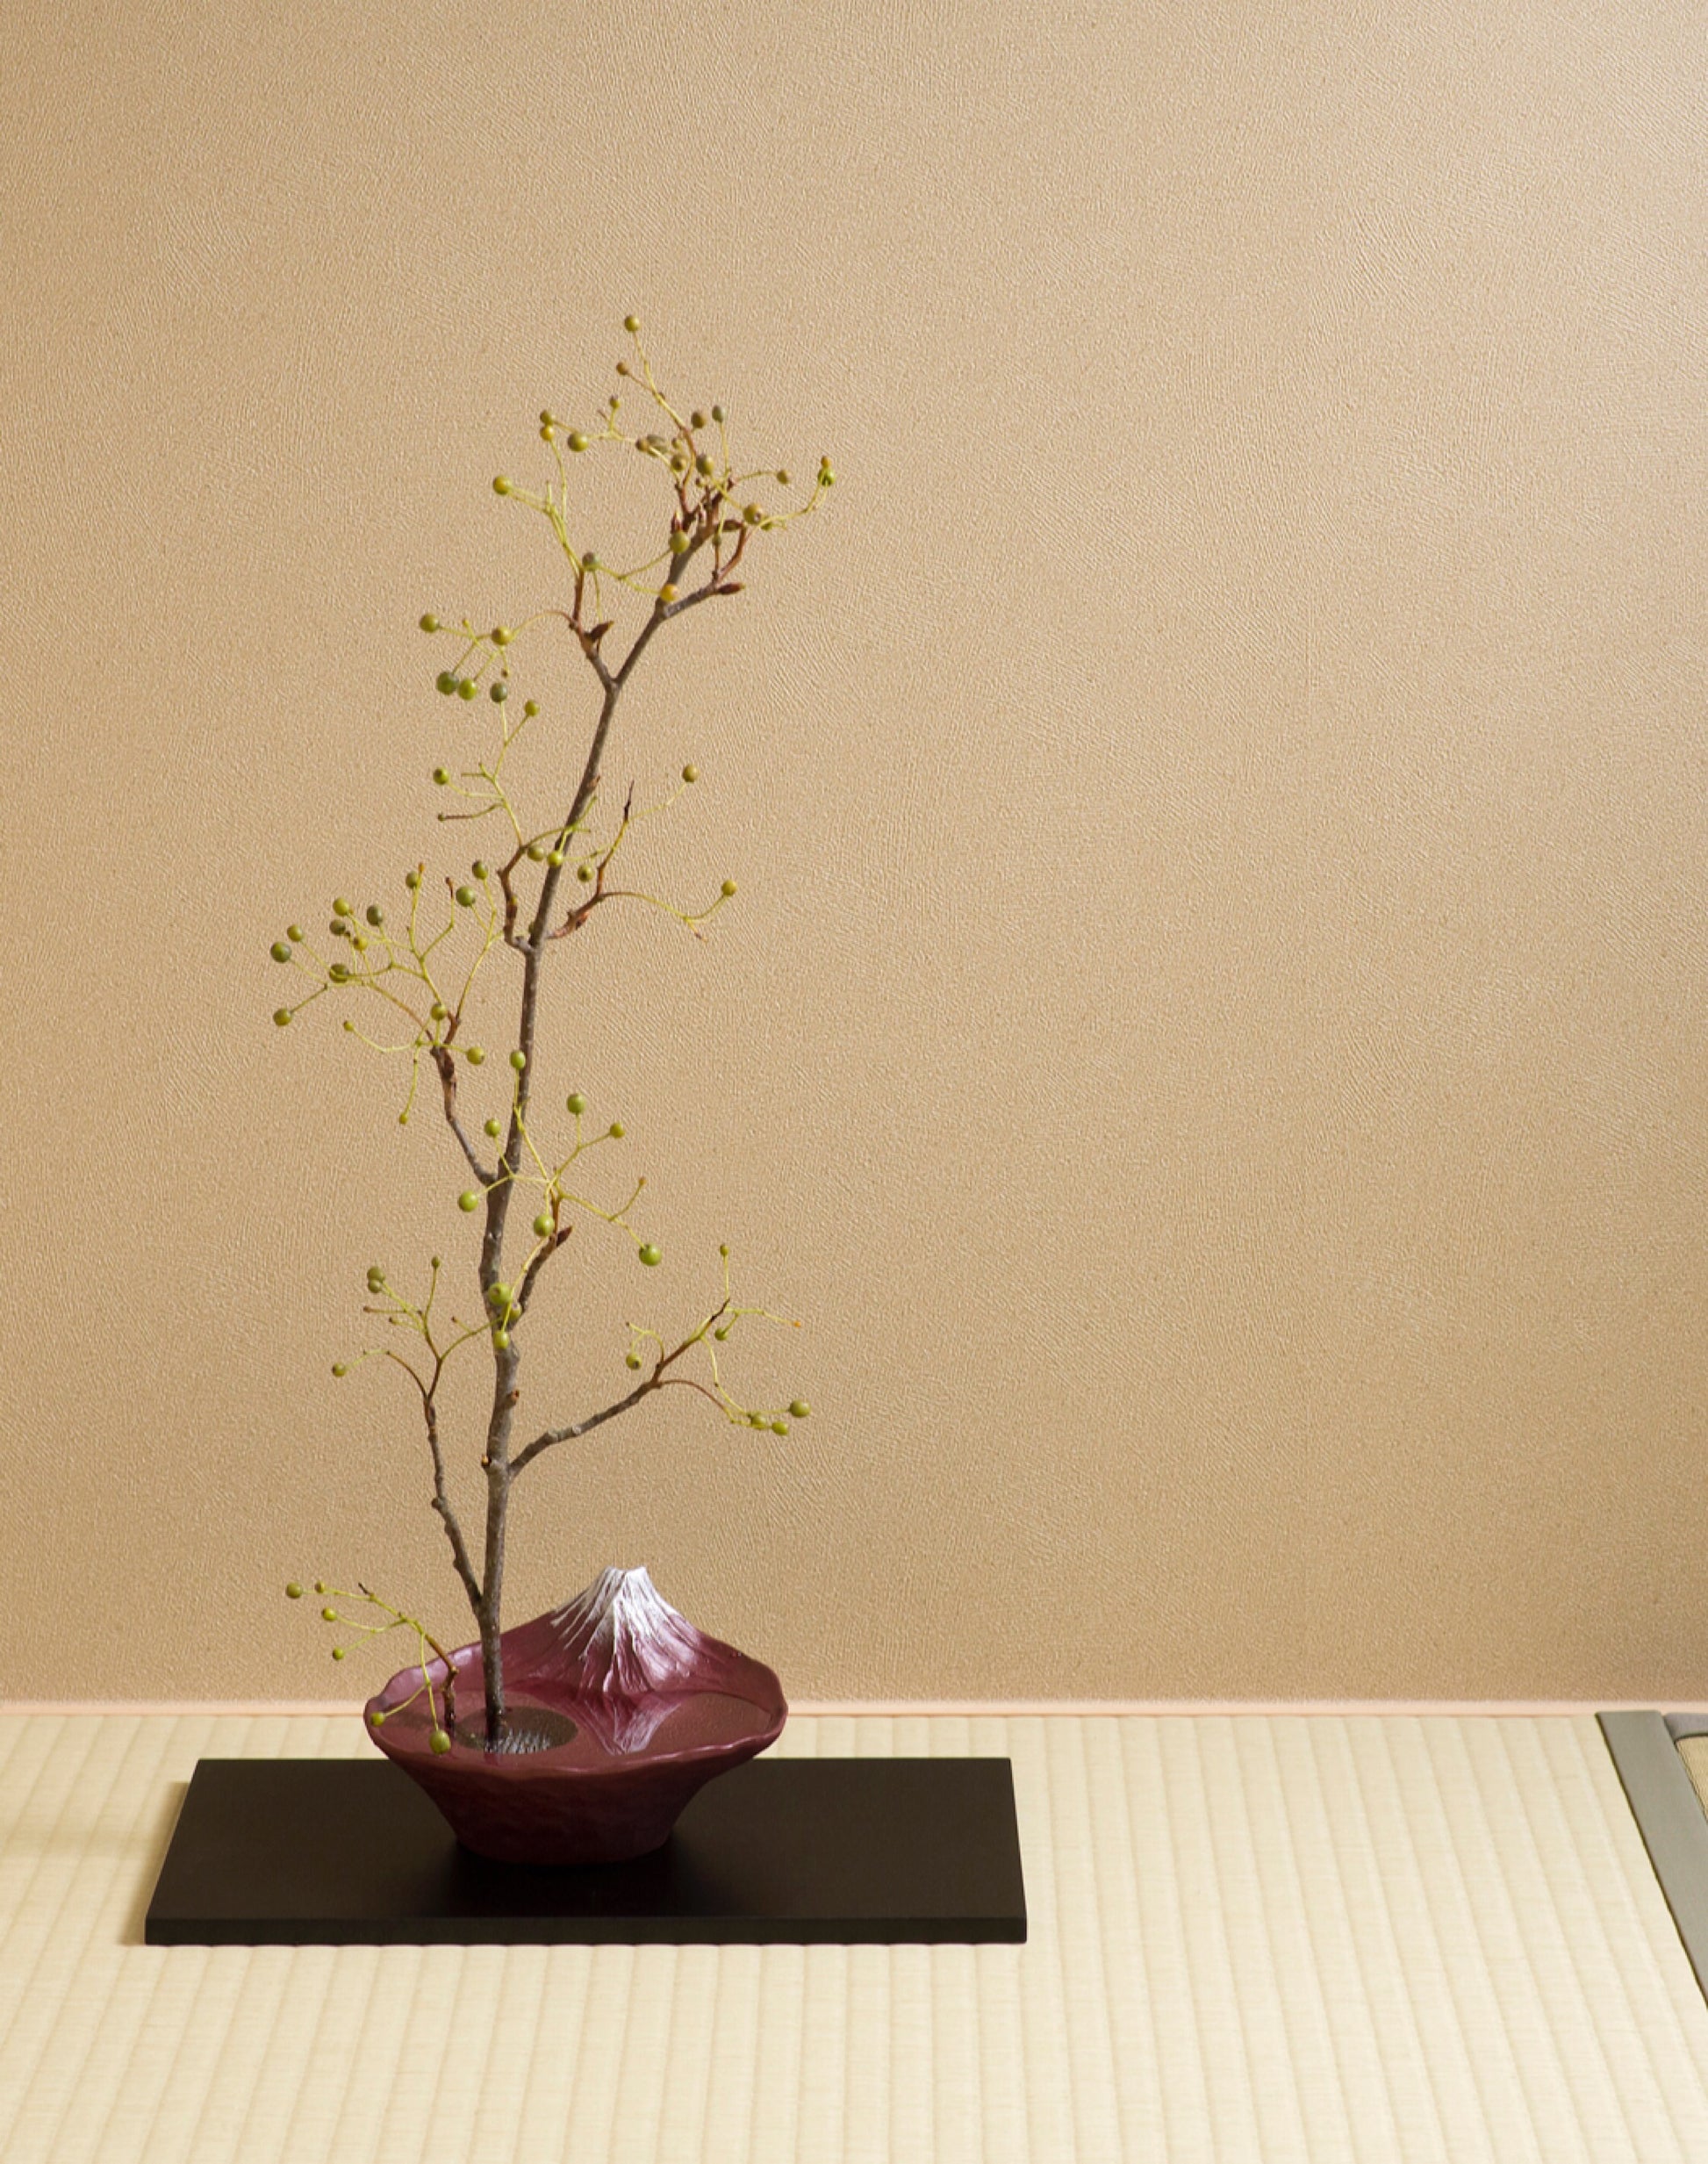 Vase Mount Fuji Red with a flower